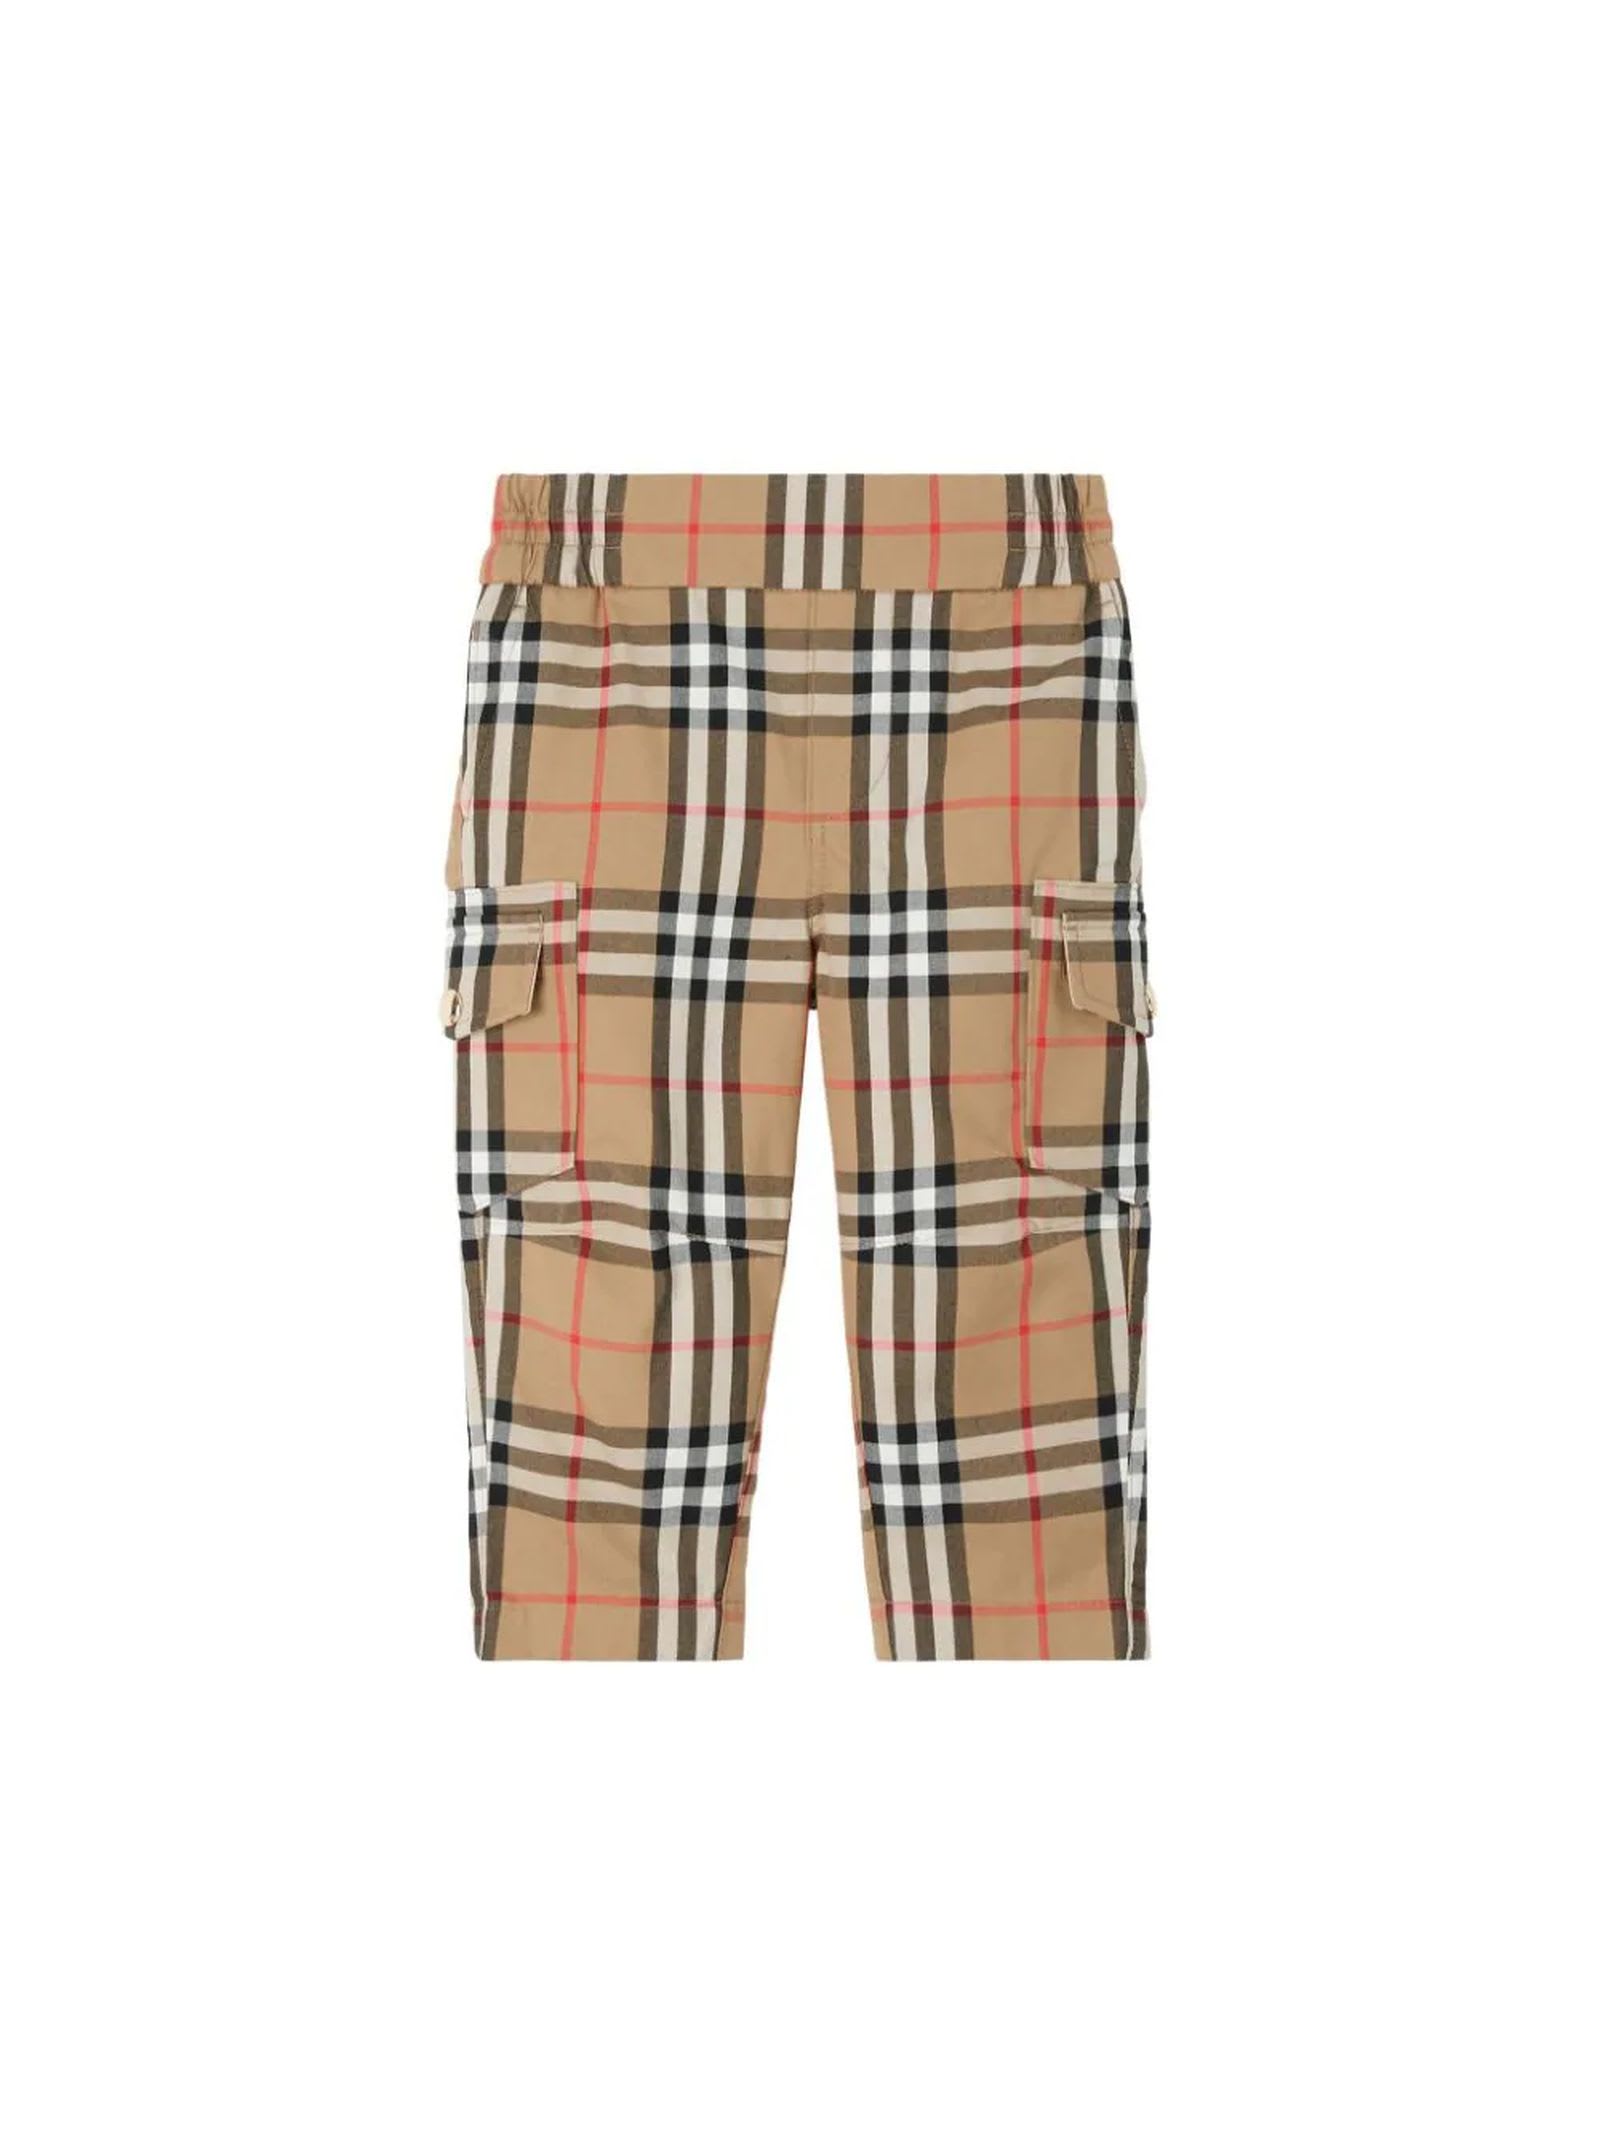 BURBERRY CHECK COTTON TROUSERS